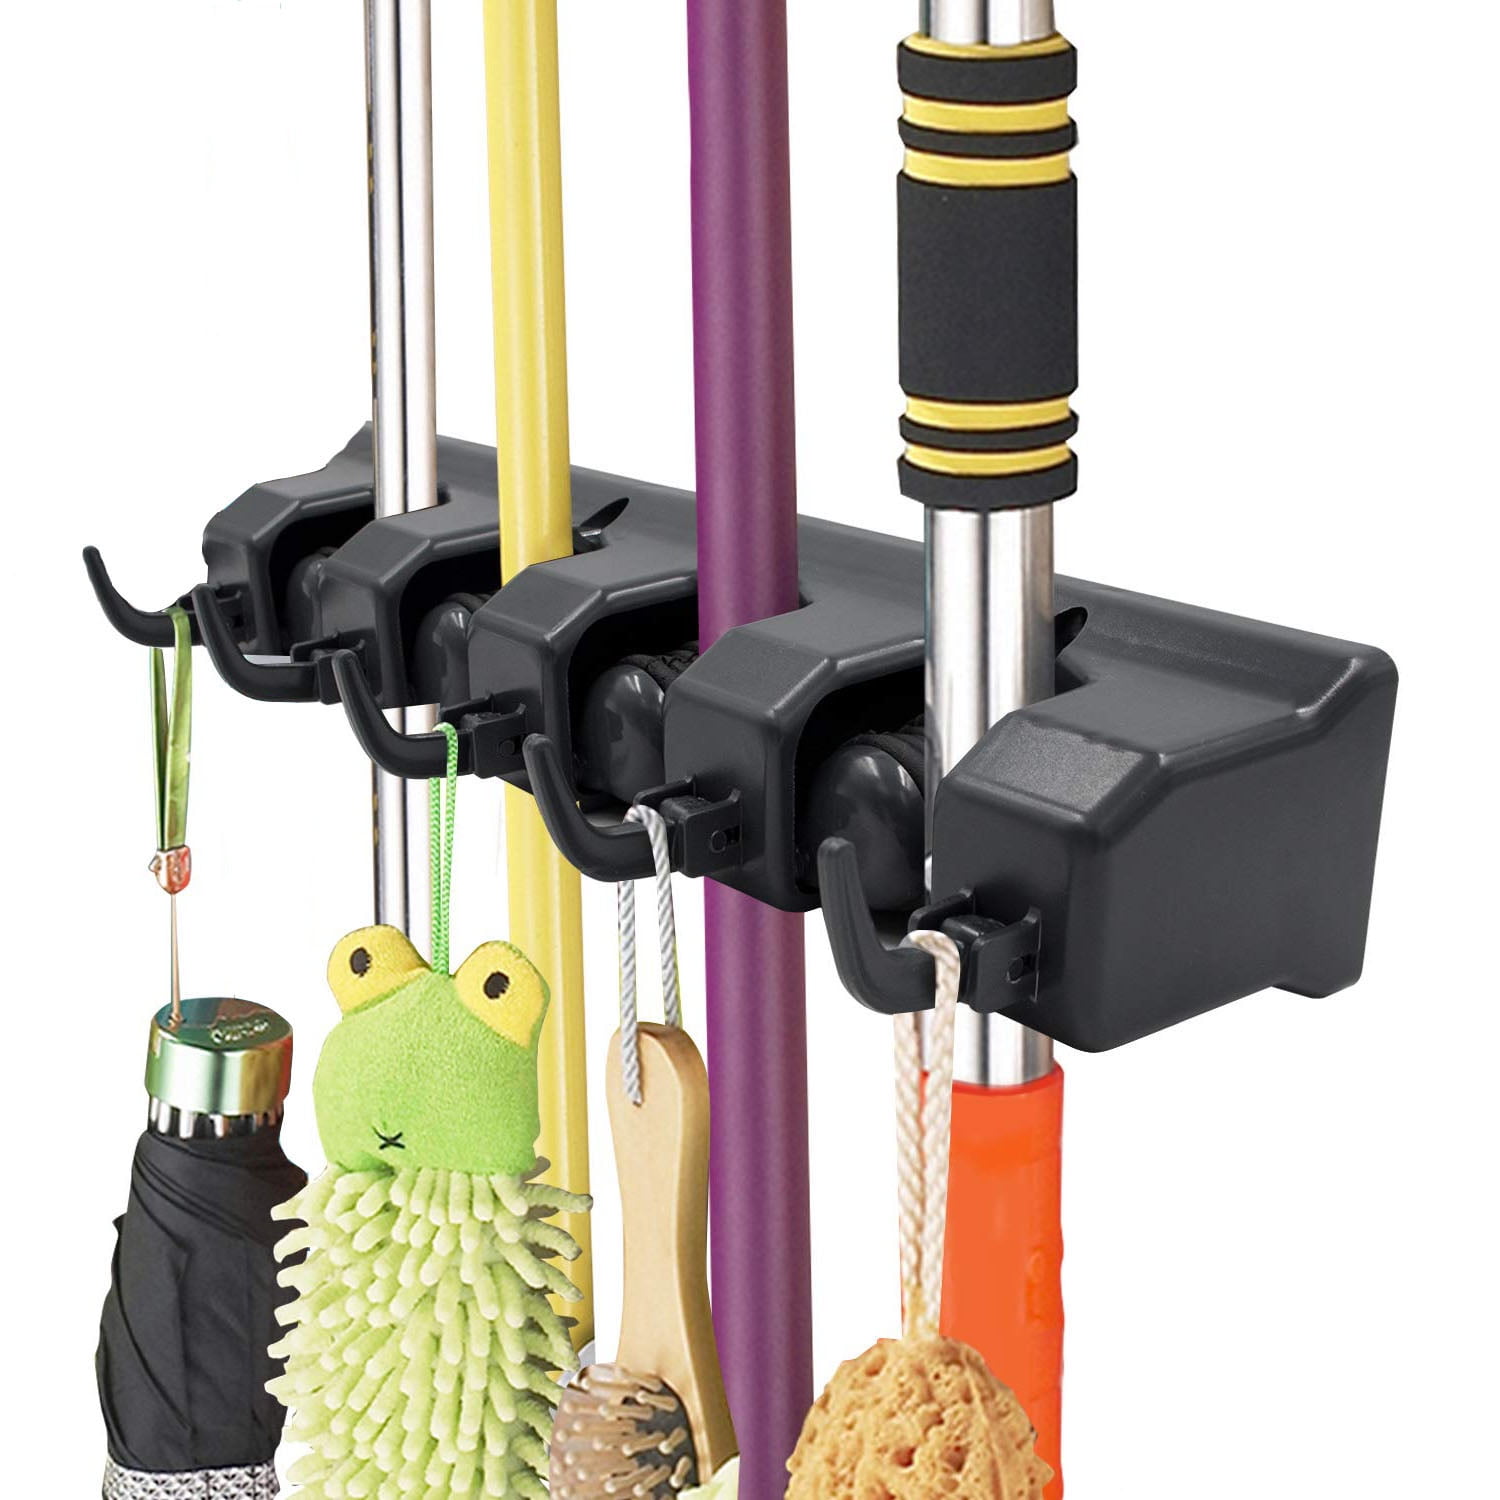 Mop Broom Holder, Garden Tools Wall Mounted Organizer Storage Rack for  Kitchen Garden and Garage, Laundry Offices(4 Position with 5 Hooks) -  Walmart.com